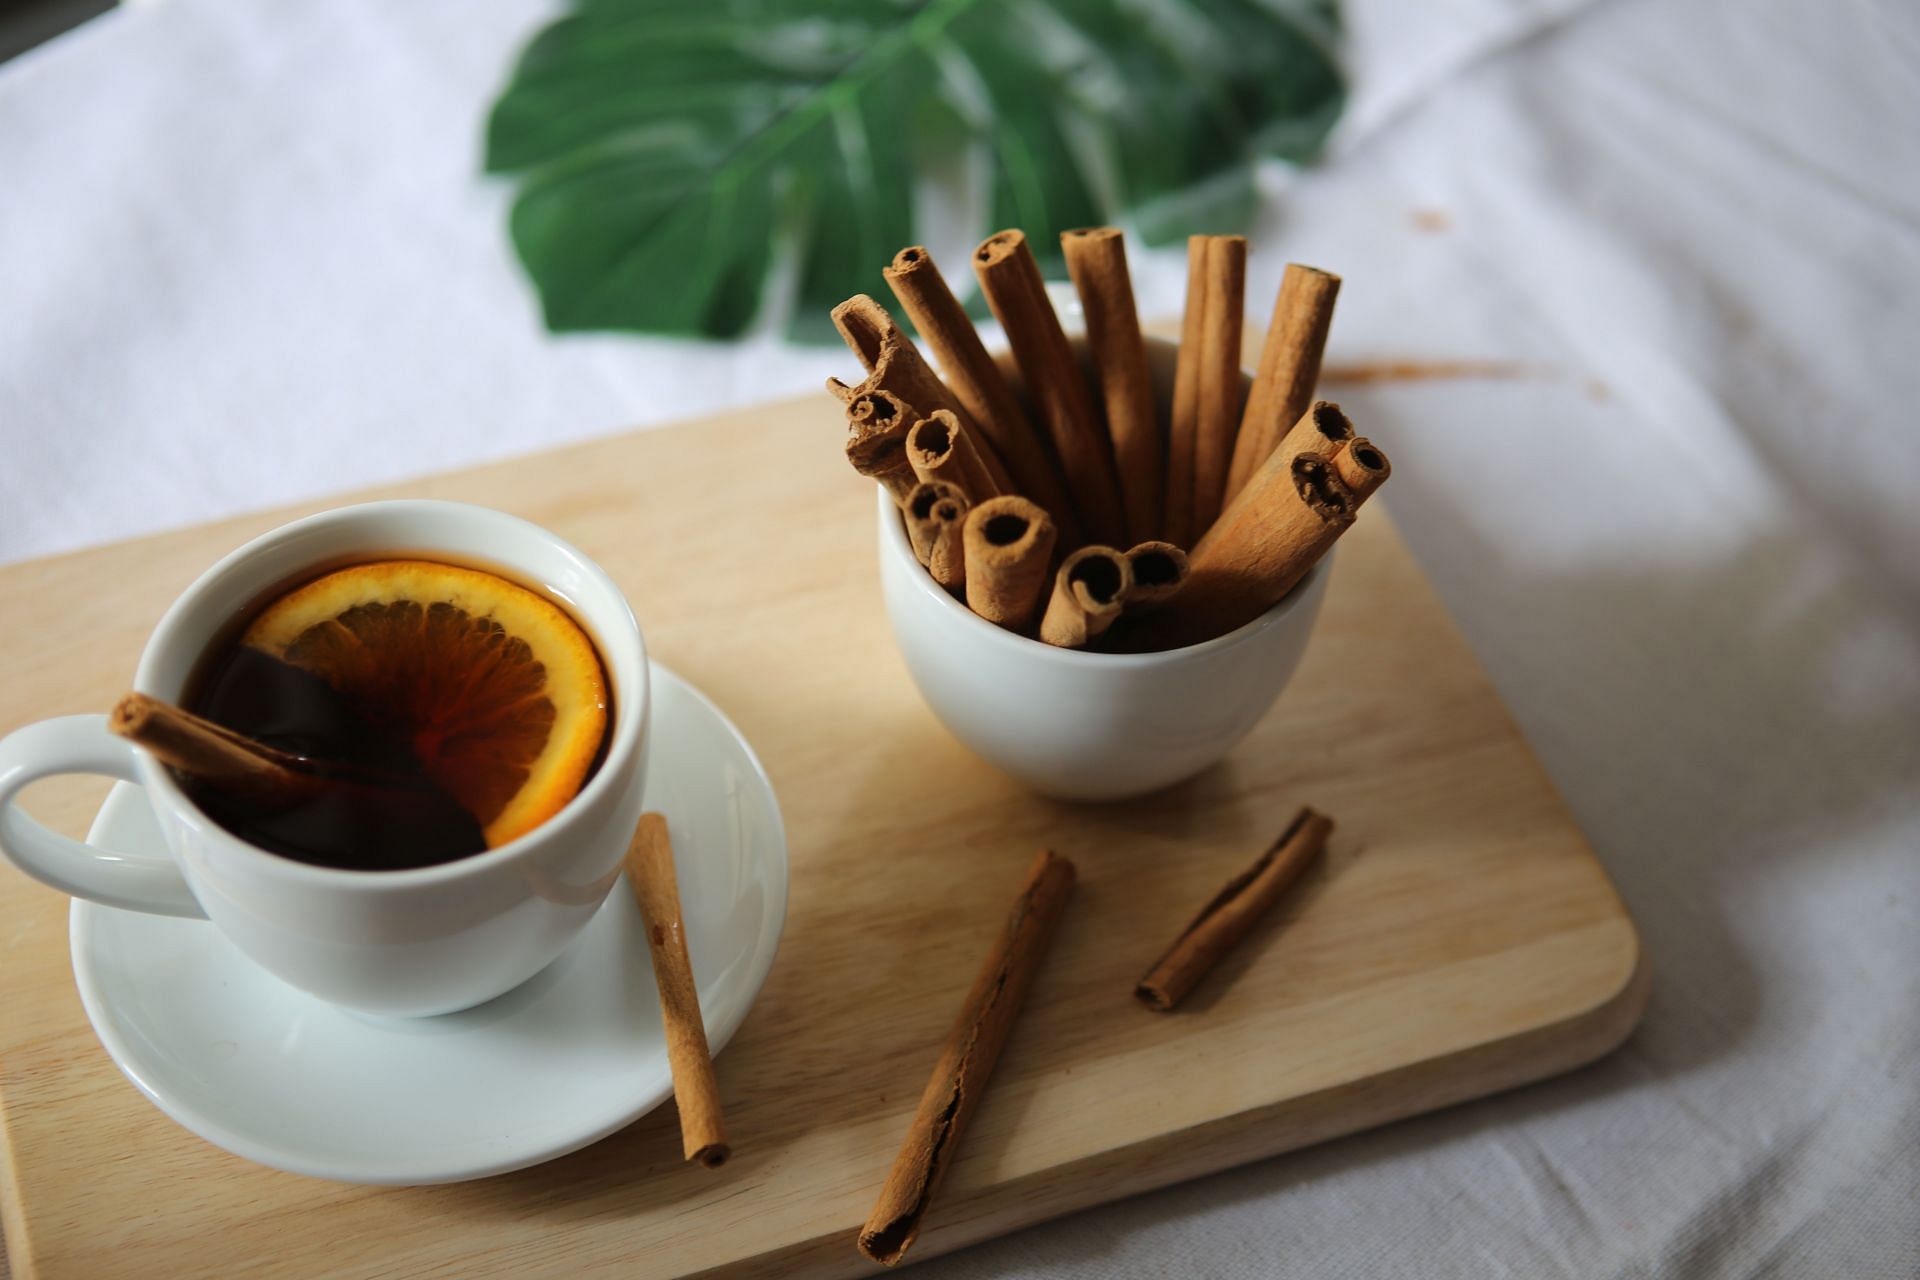 Chamomile and cinnamon tea is an excellent drink to improve metabolism. (Image via Pexels/Ngo Trong An)